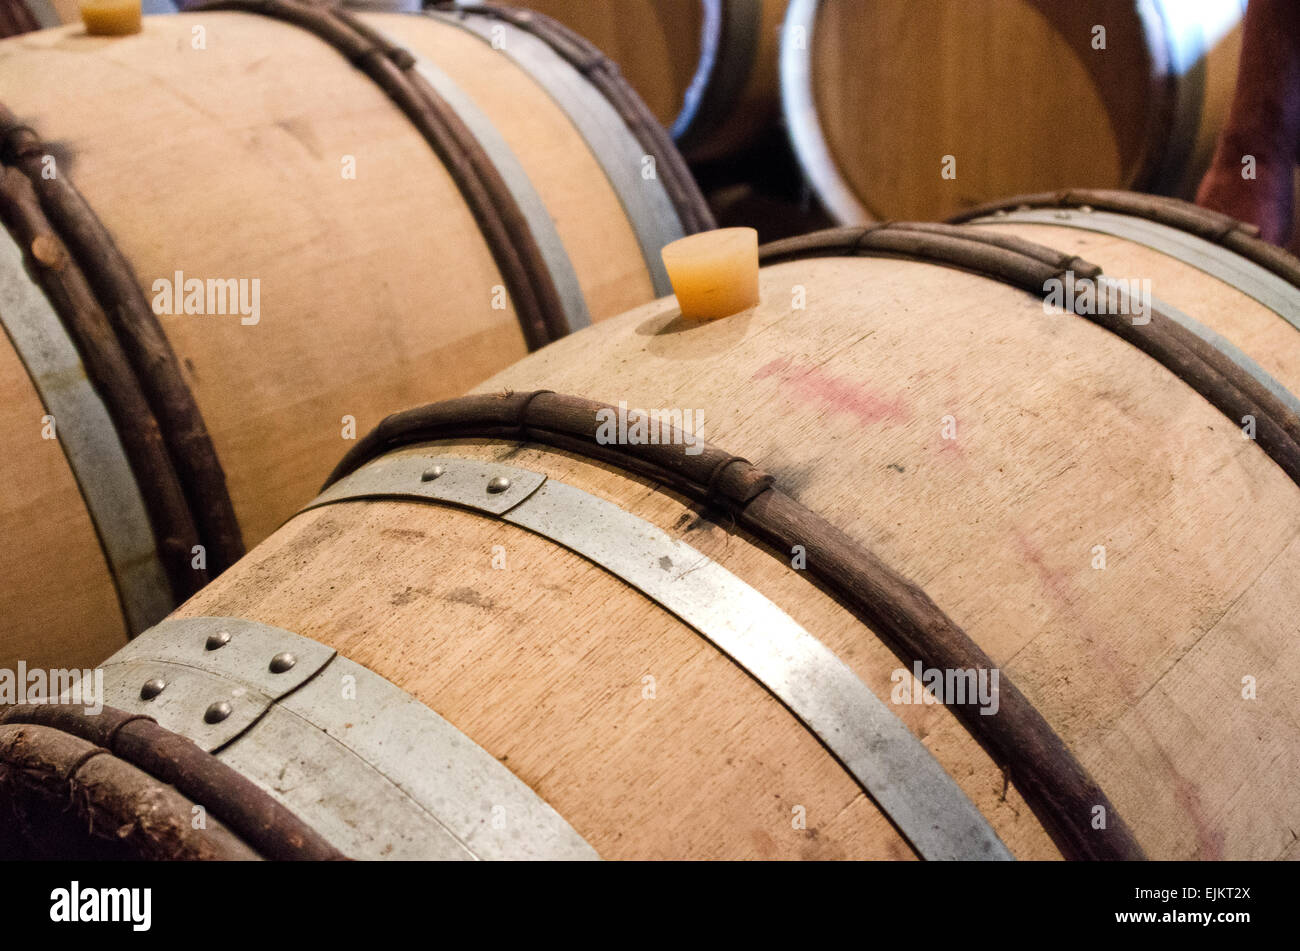 Casks of wine in the cellars of Domaine de la Folie, a vineyard near Chagny in the Côte Chalonnaise of Burgundy, France. Stock Photo